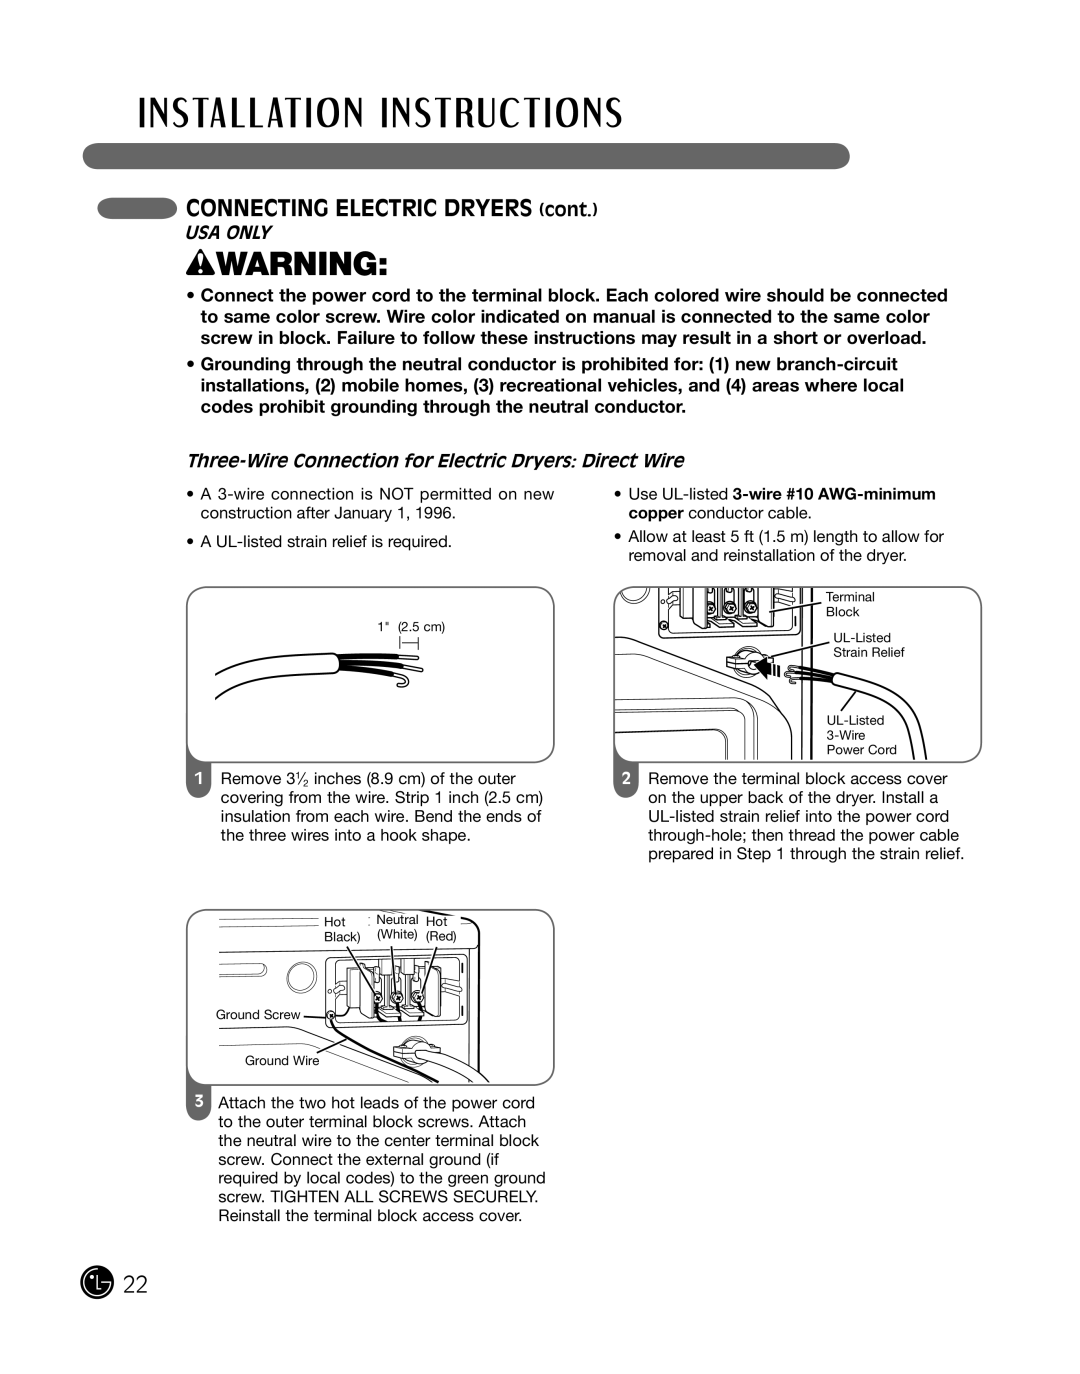 LG Electronics P154 manual Three-Wire Connection for Electric Dryers Direct Wire, wWARNING, CONNECTING ELECTRIC DRYERS cont 